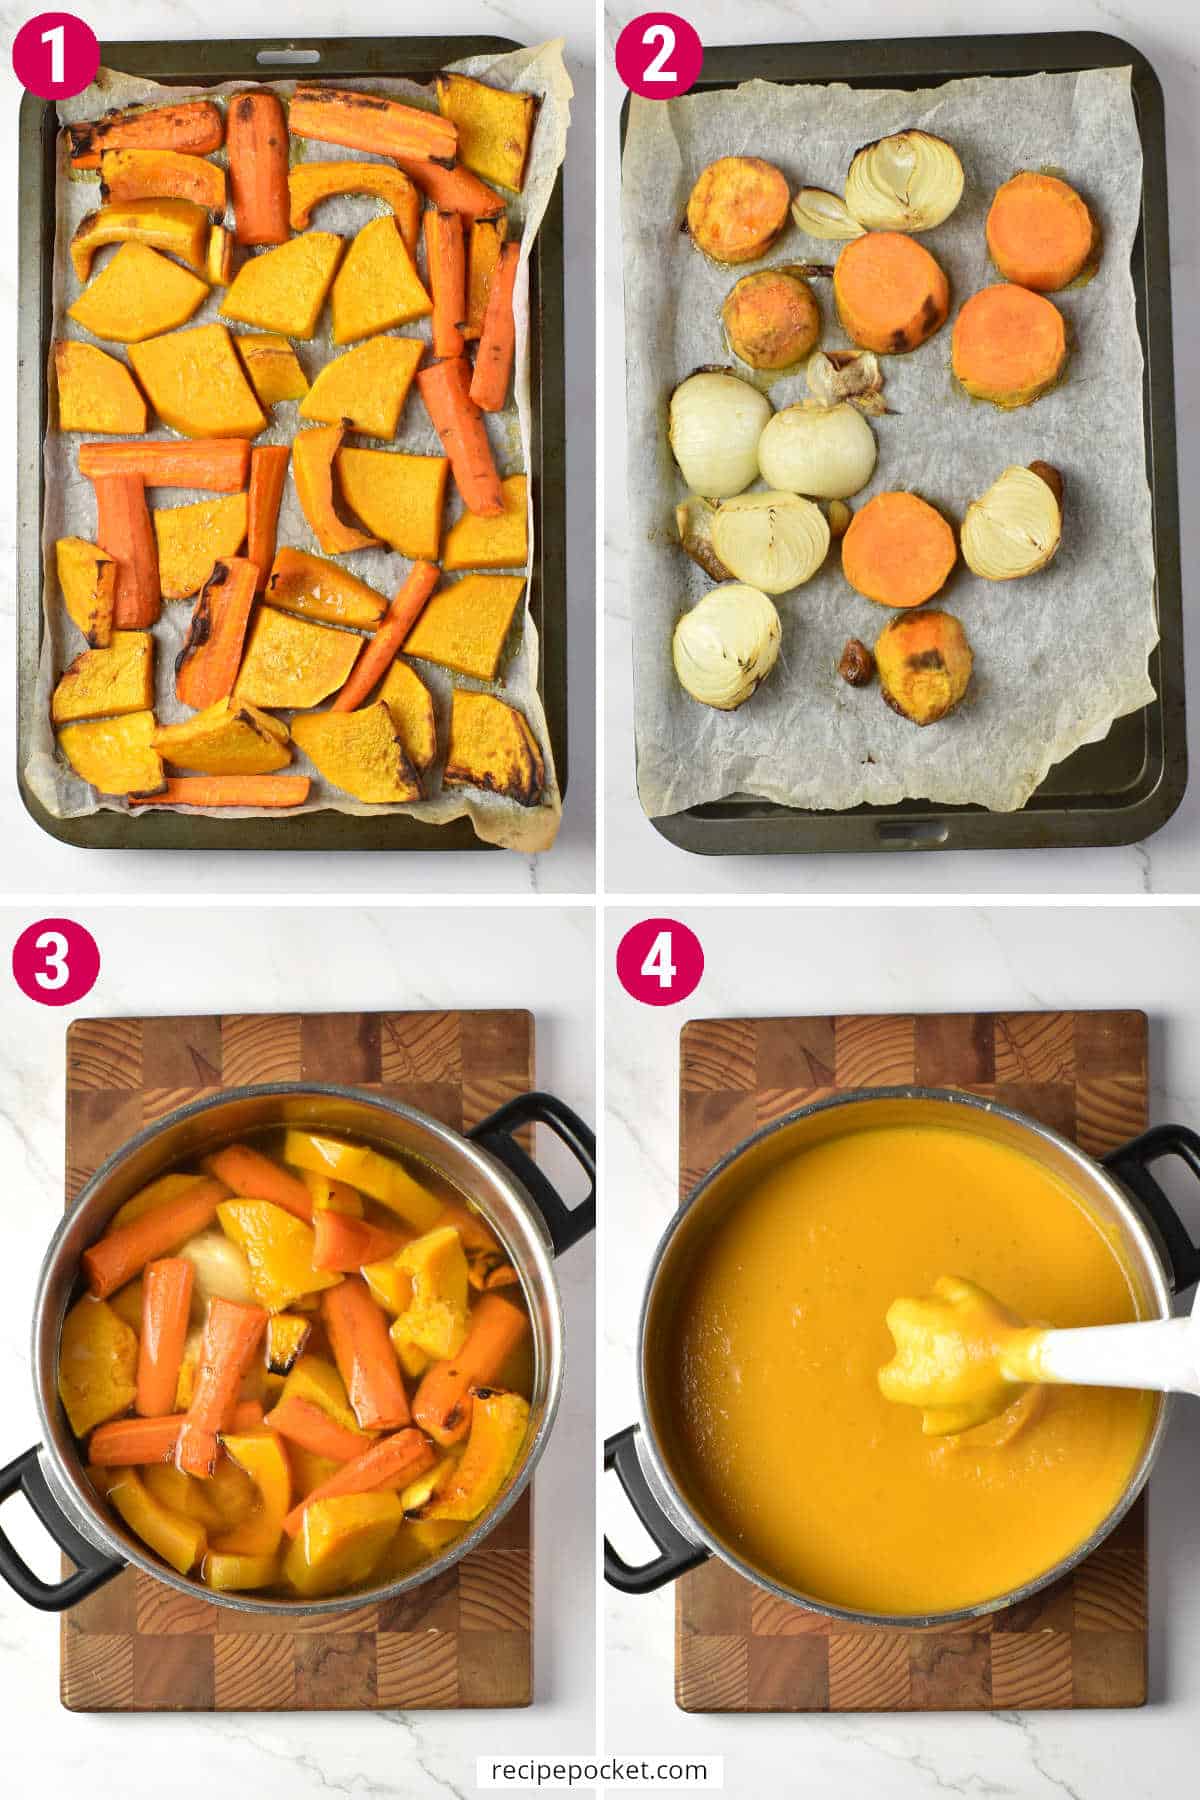 Image collage showing roasted vegetables on a tray, in a saucepan before cooking and being pureed with a stick blender.